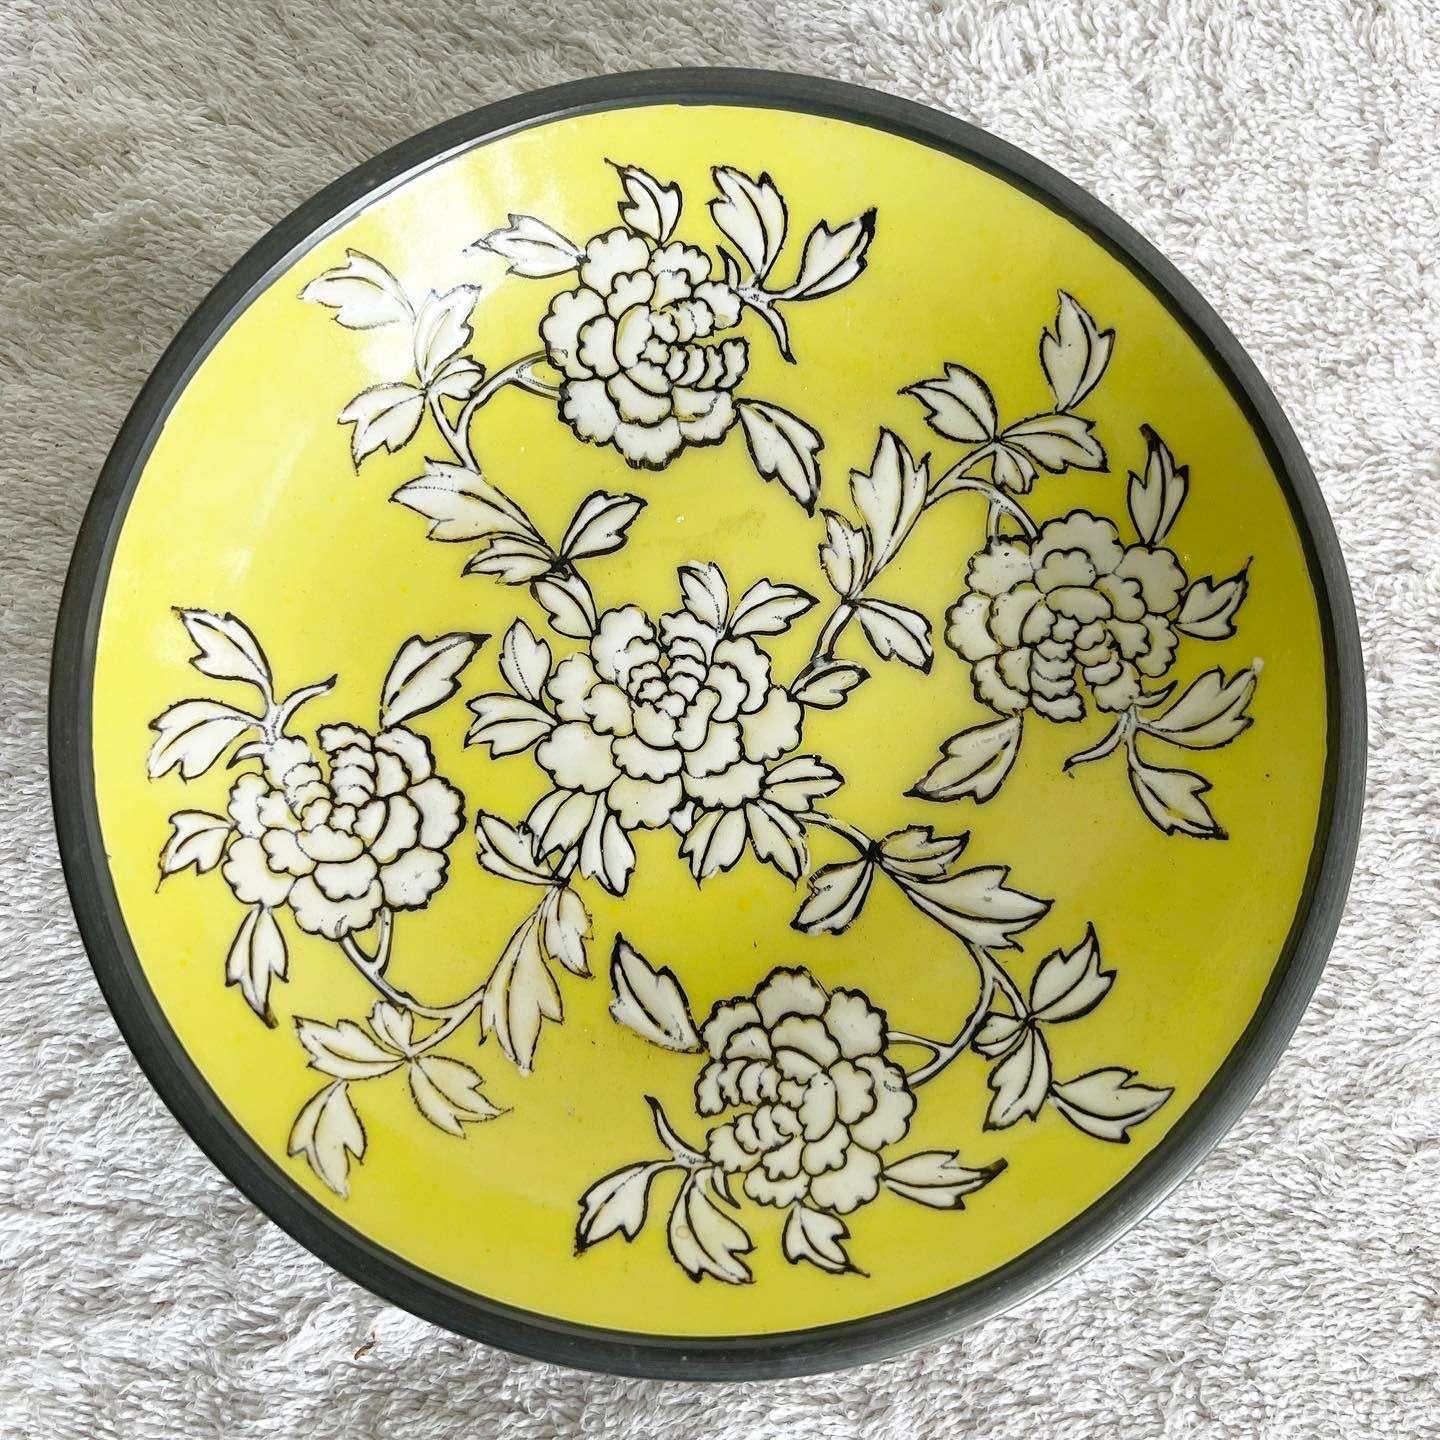 Late 20th Century Chinese Yellow Floral Ginger Jar With Metal and Ceramic Plate - 2 Pieces For Sale